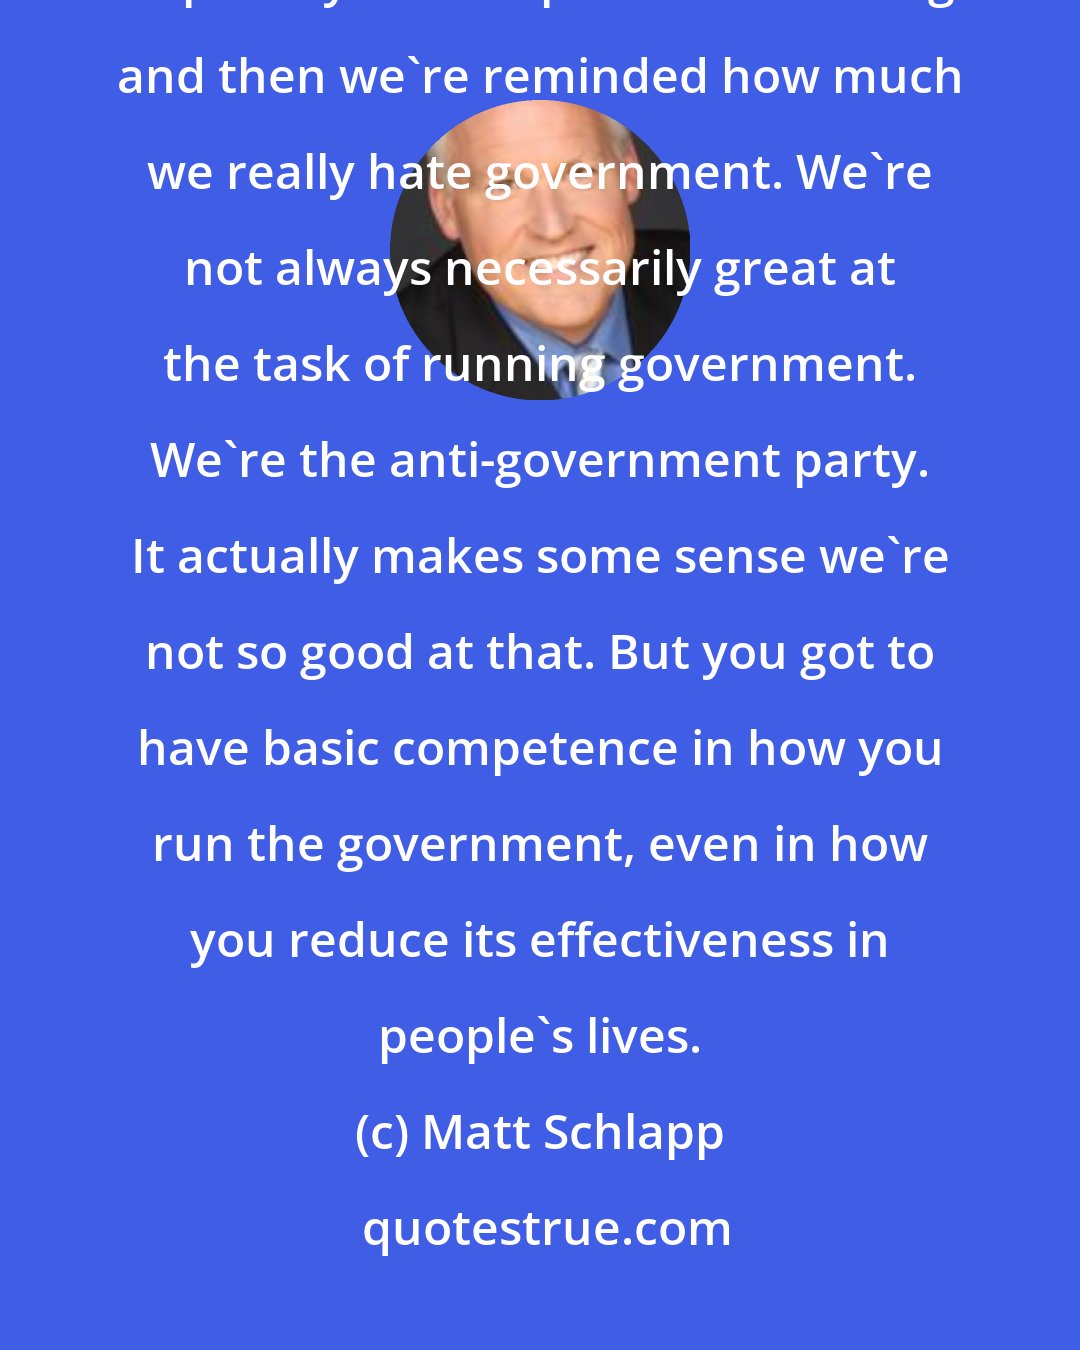 Matt Schlapp: P.J. O'Rourke says that conservatives really hate government and every couple of years we put them in charge and then we're reminded how much we really hate government. We're not always necessarily great at the task of running government. We're the anti-government party. It actually makes some sense we're not so good at that. But you got to have basic competence in how you run the government, even in how you reduce its effectiveness in people's lives.